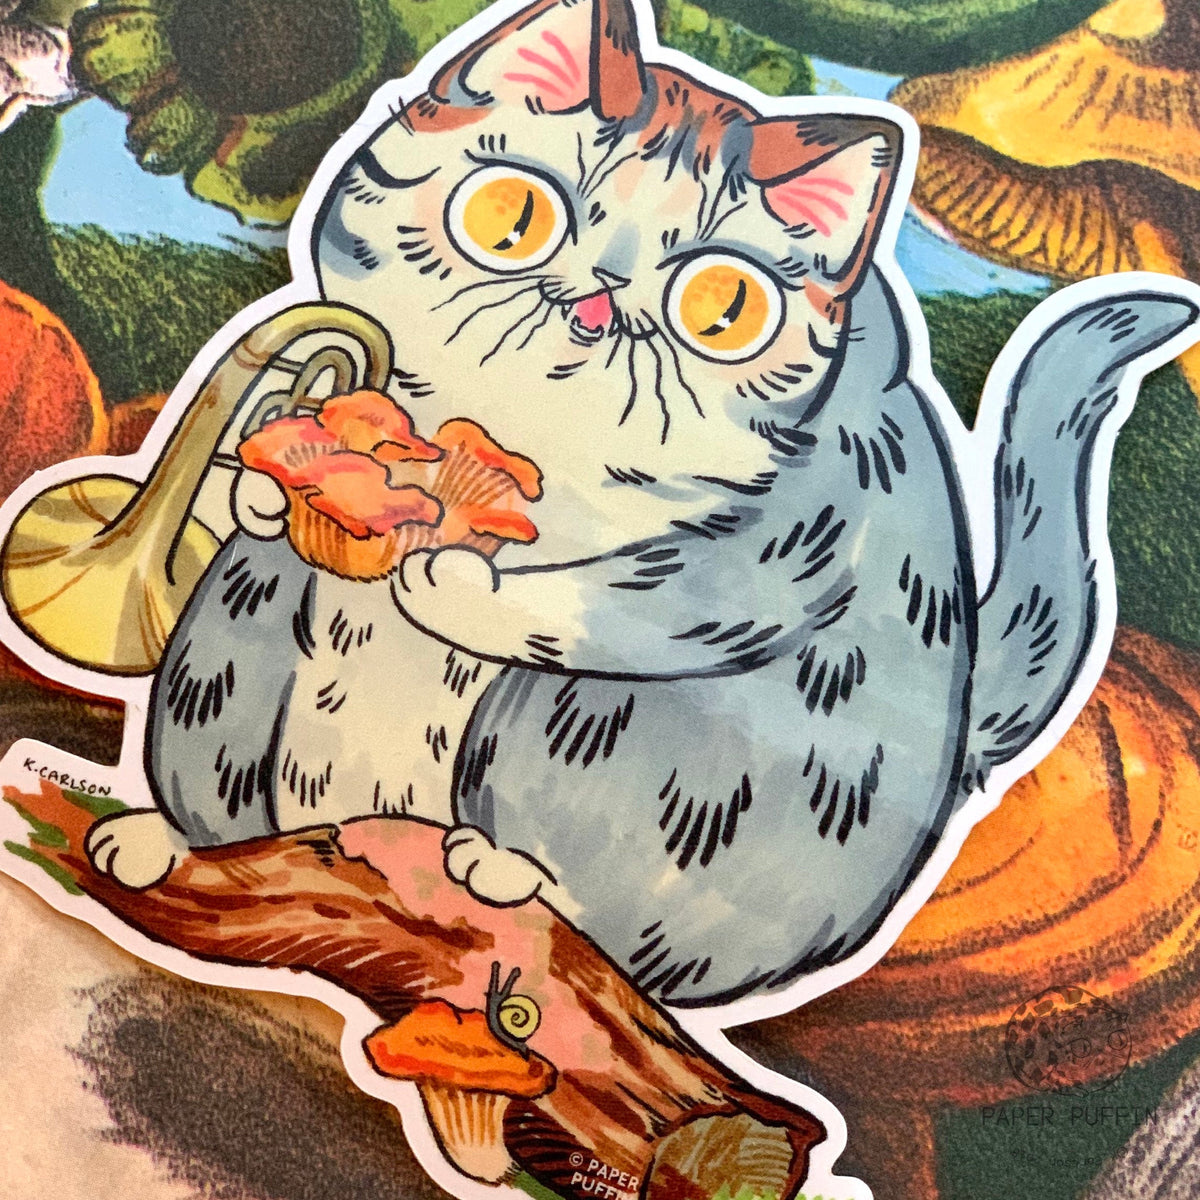 Food Cat Stickers – PaperPuffin